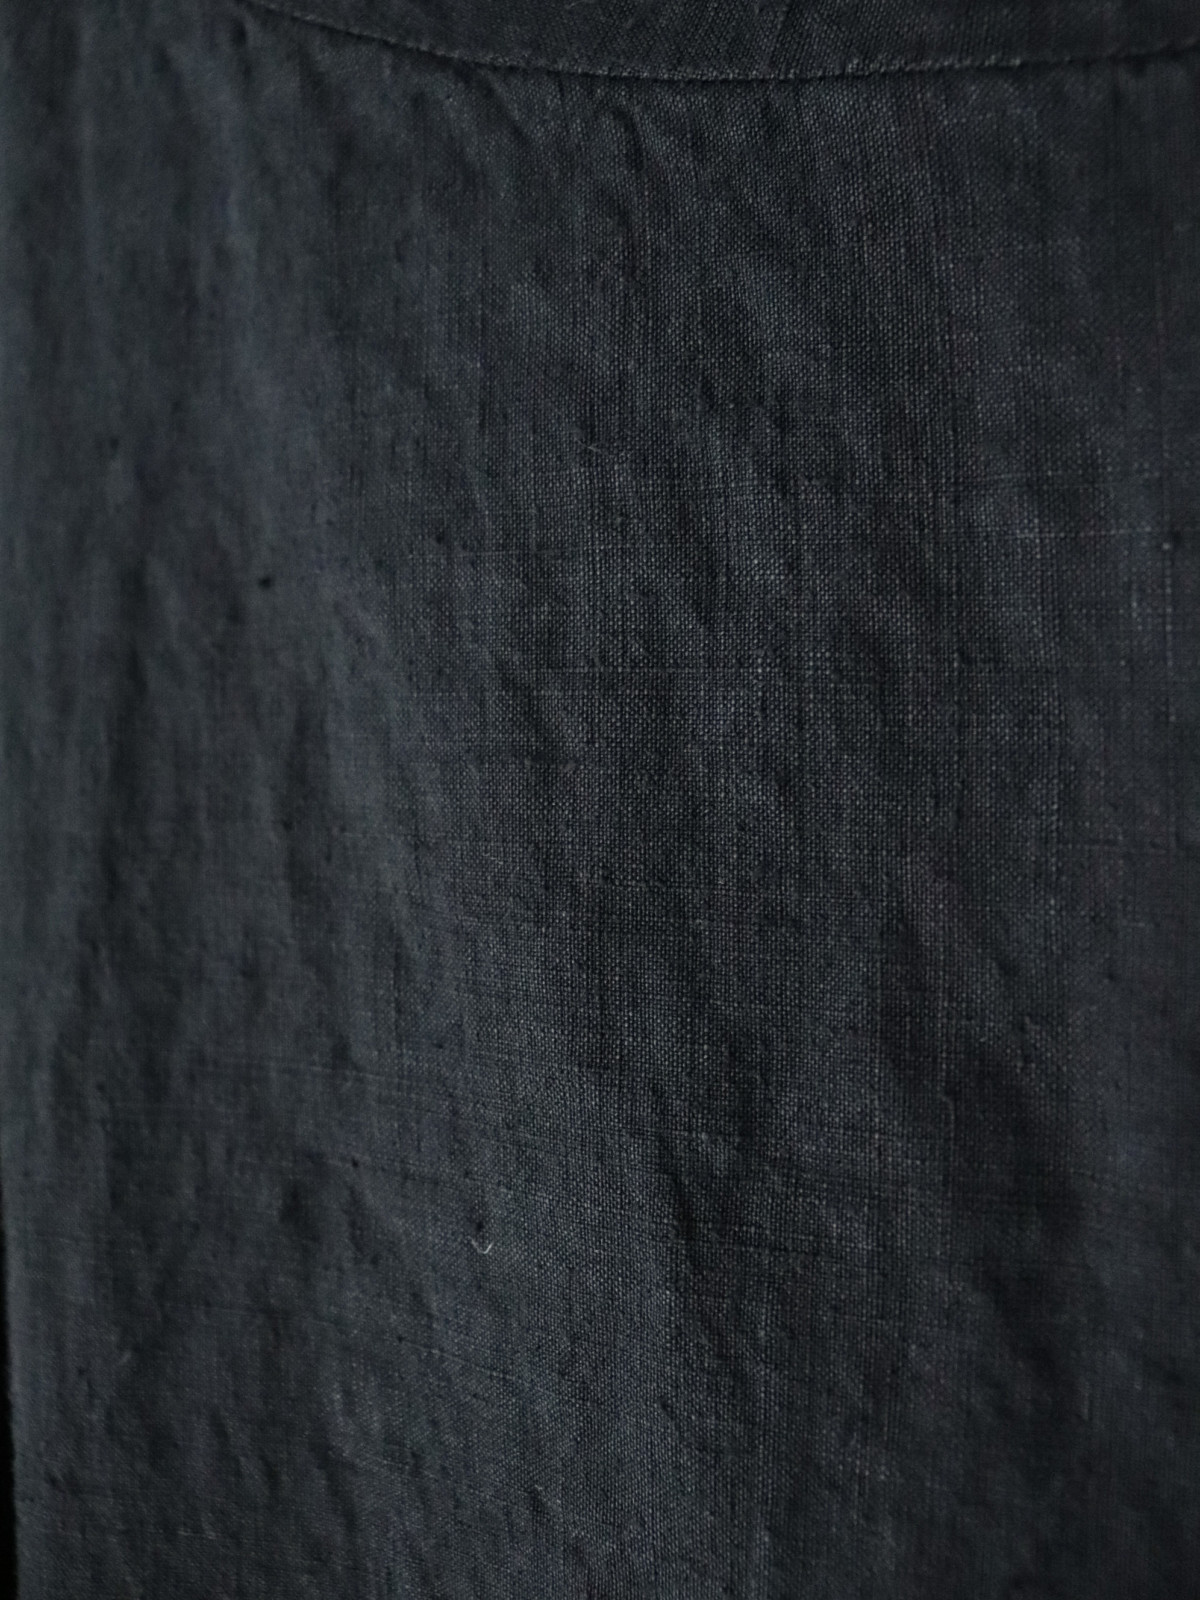 Black-dyed ,one-piece, french linen, boat neck